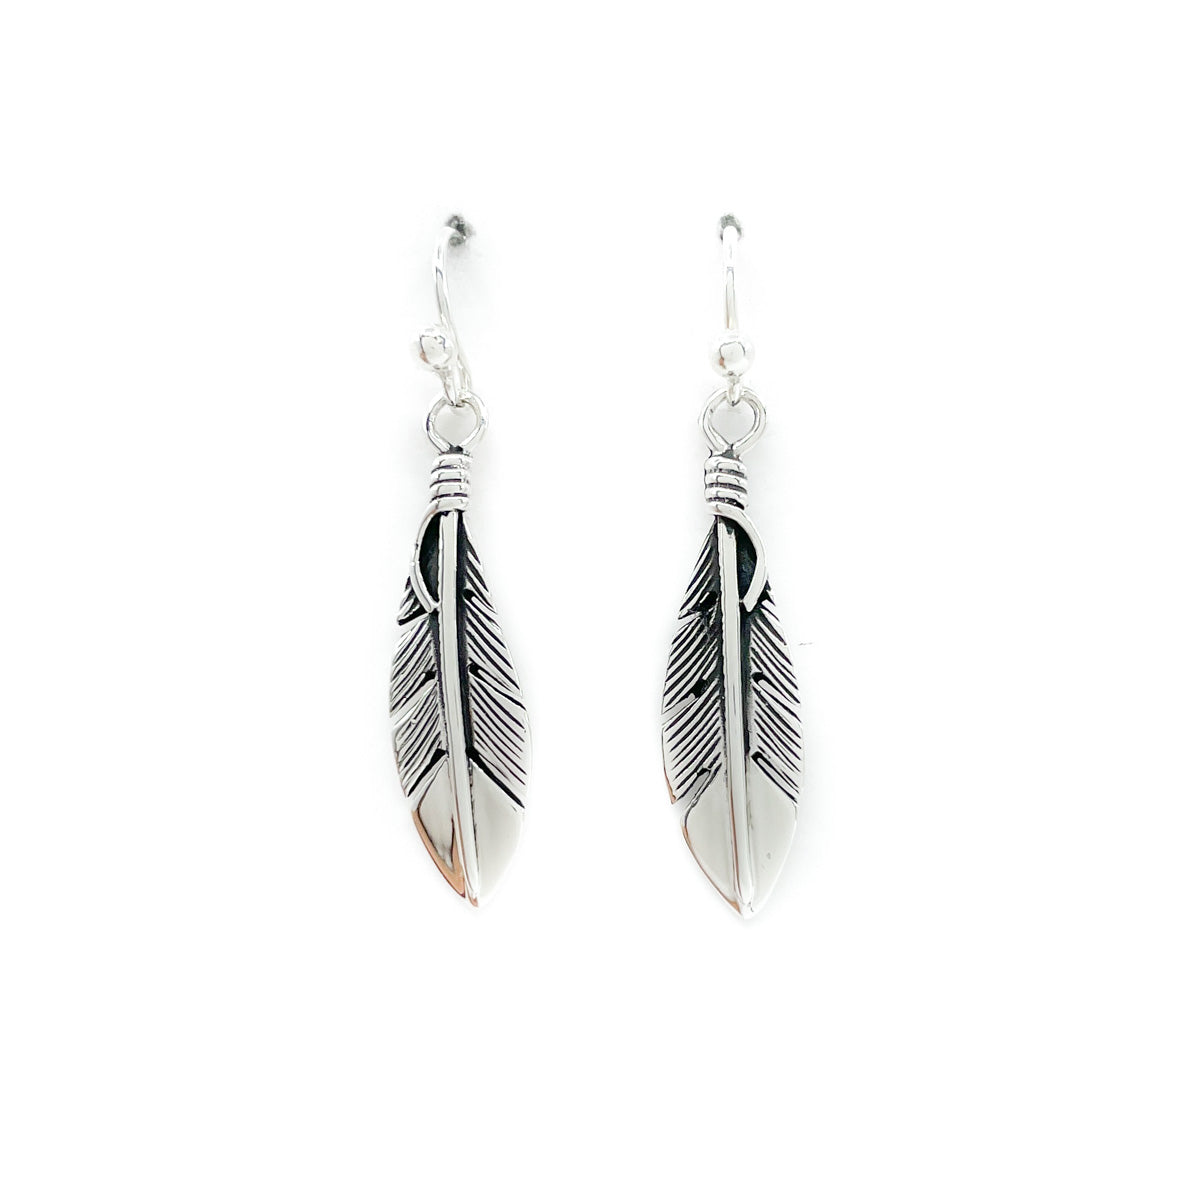 Sterling Silver Feather Earrings, Handmade Native American Indian Jewelry,  Navajo Silversmith Tawny Cruz Designs, Southwestern Style Jewelry - Etsy